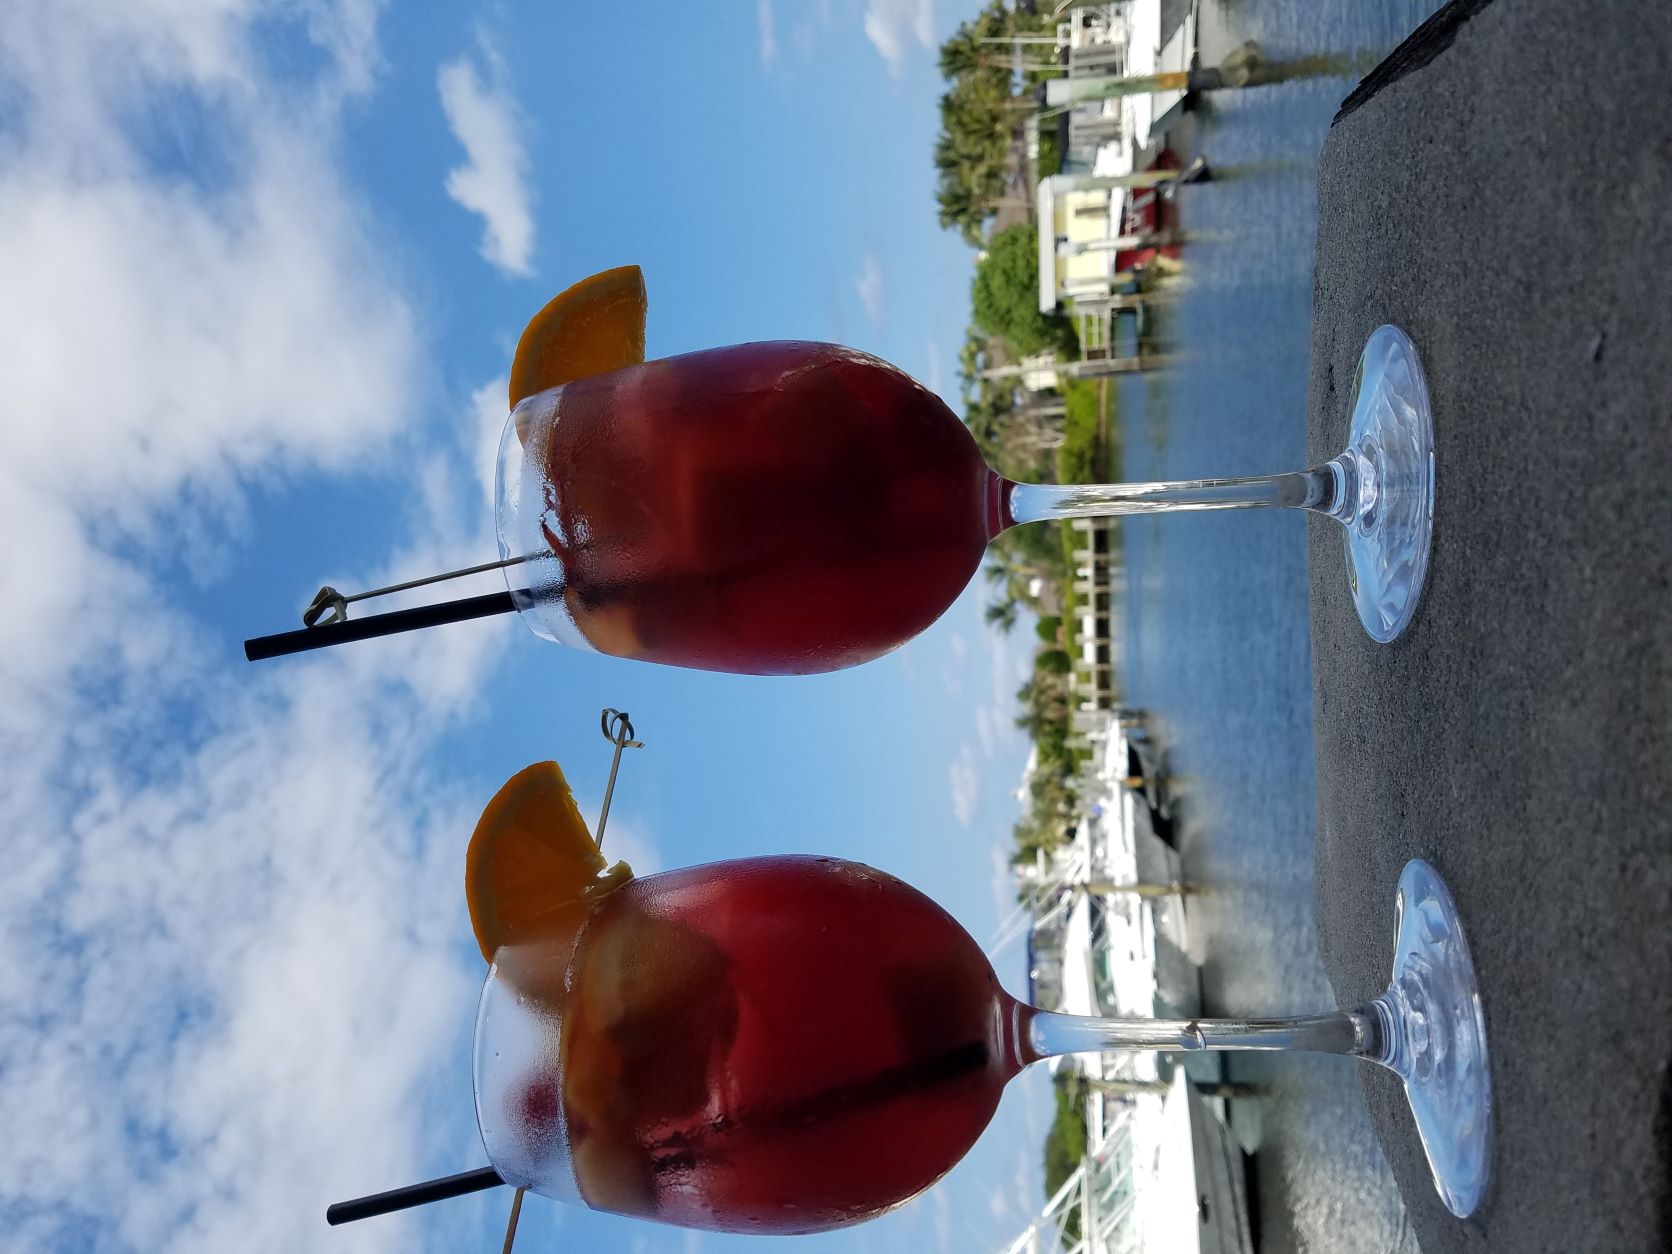 alt text = "two refreshing long stemmed glasses of red sangria garnished with fruit with a marina in the background